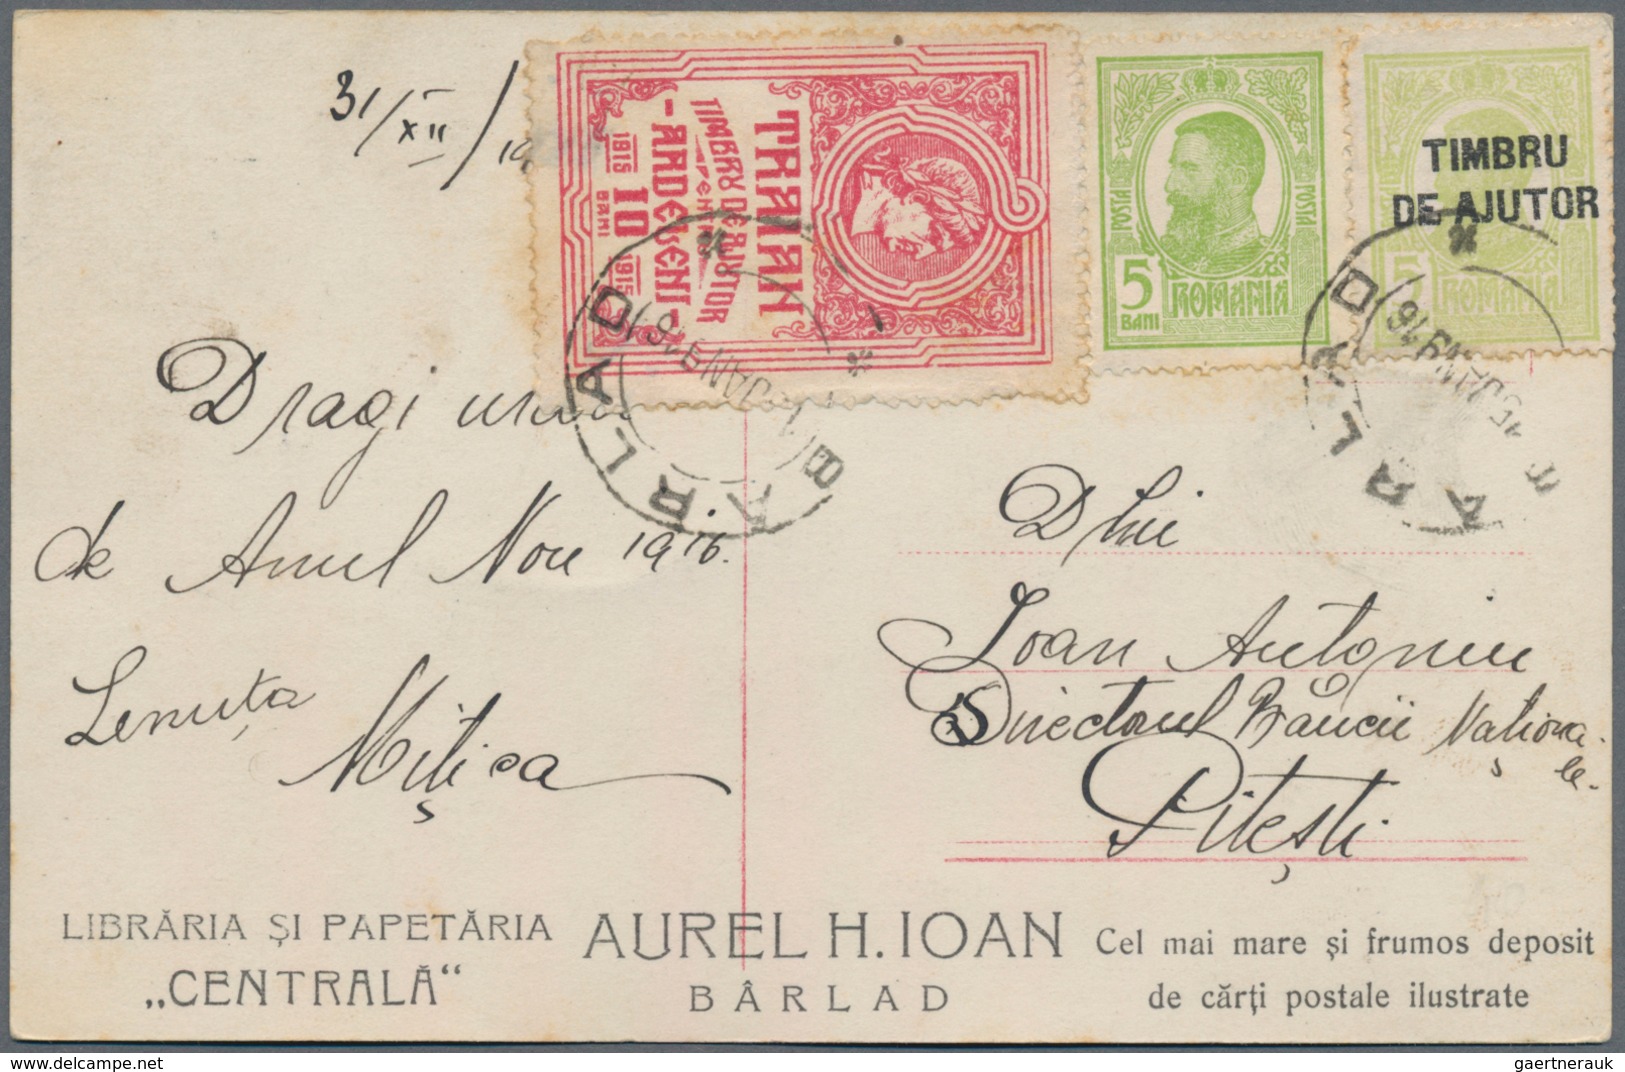 Rumänien: 1889/1944, holding of apprx. 440 commercial covers/cards, showing a vast range of interest